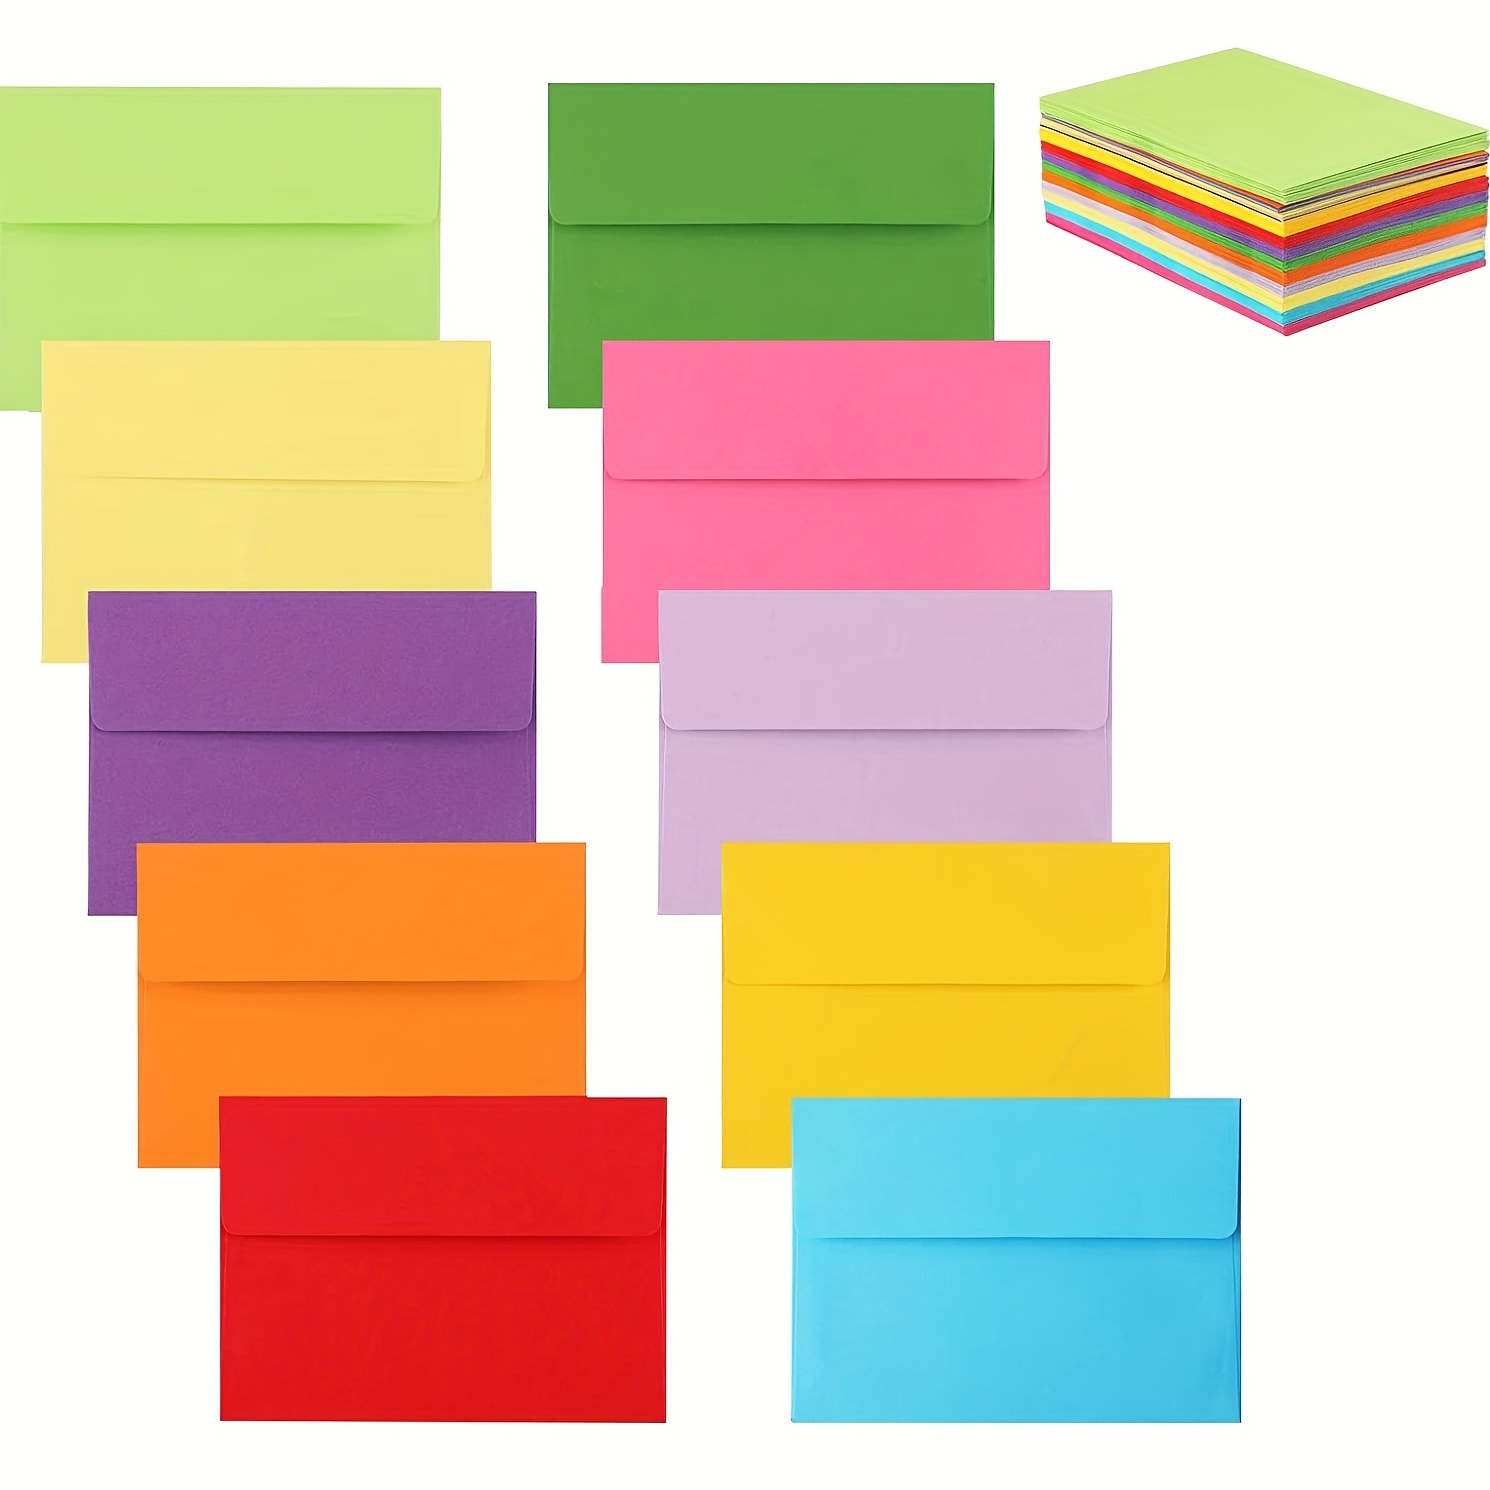 100 Pack Assorted Colors A7 Envelopes - Includes Blue, Pink, Purple, Green - for 5x7 Greeting Cards and Invitation Announcements - Square Flap